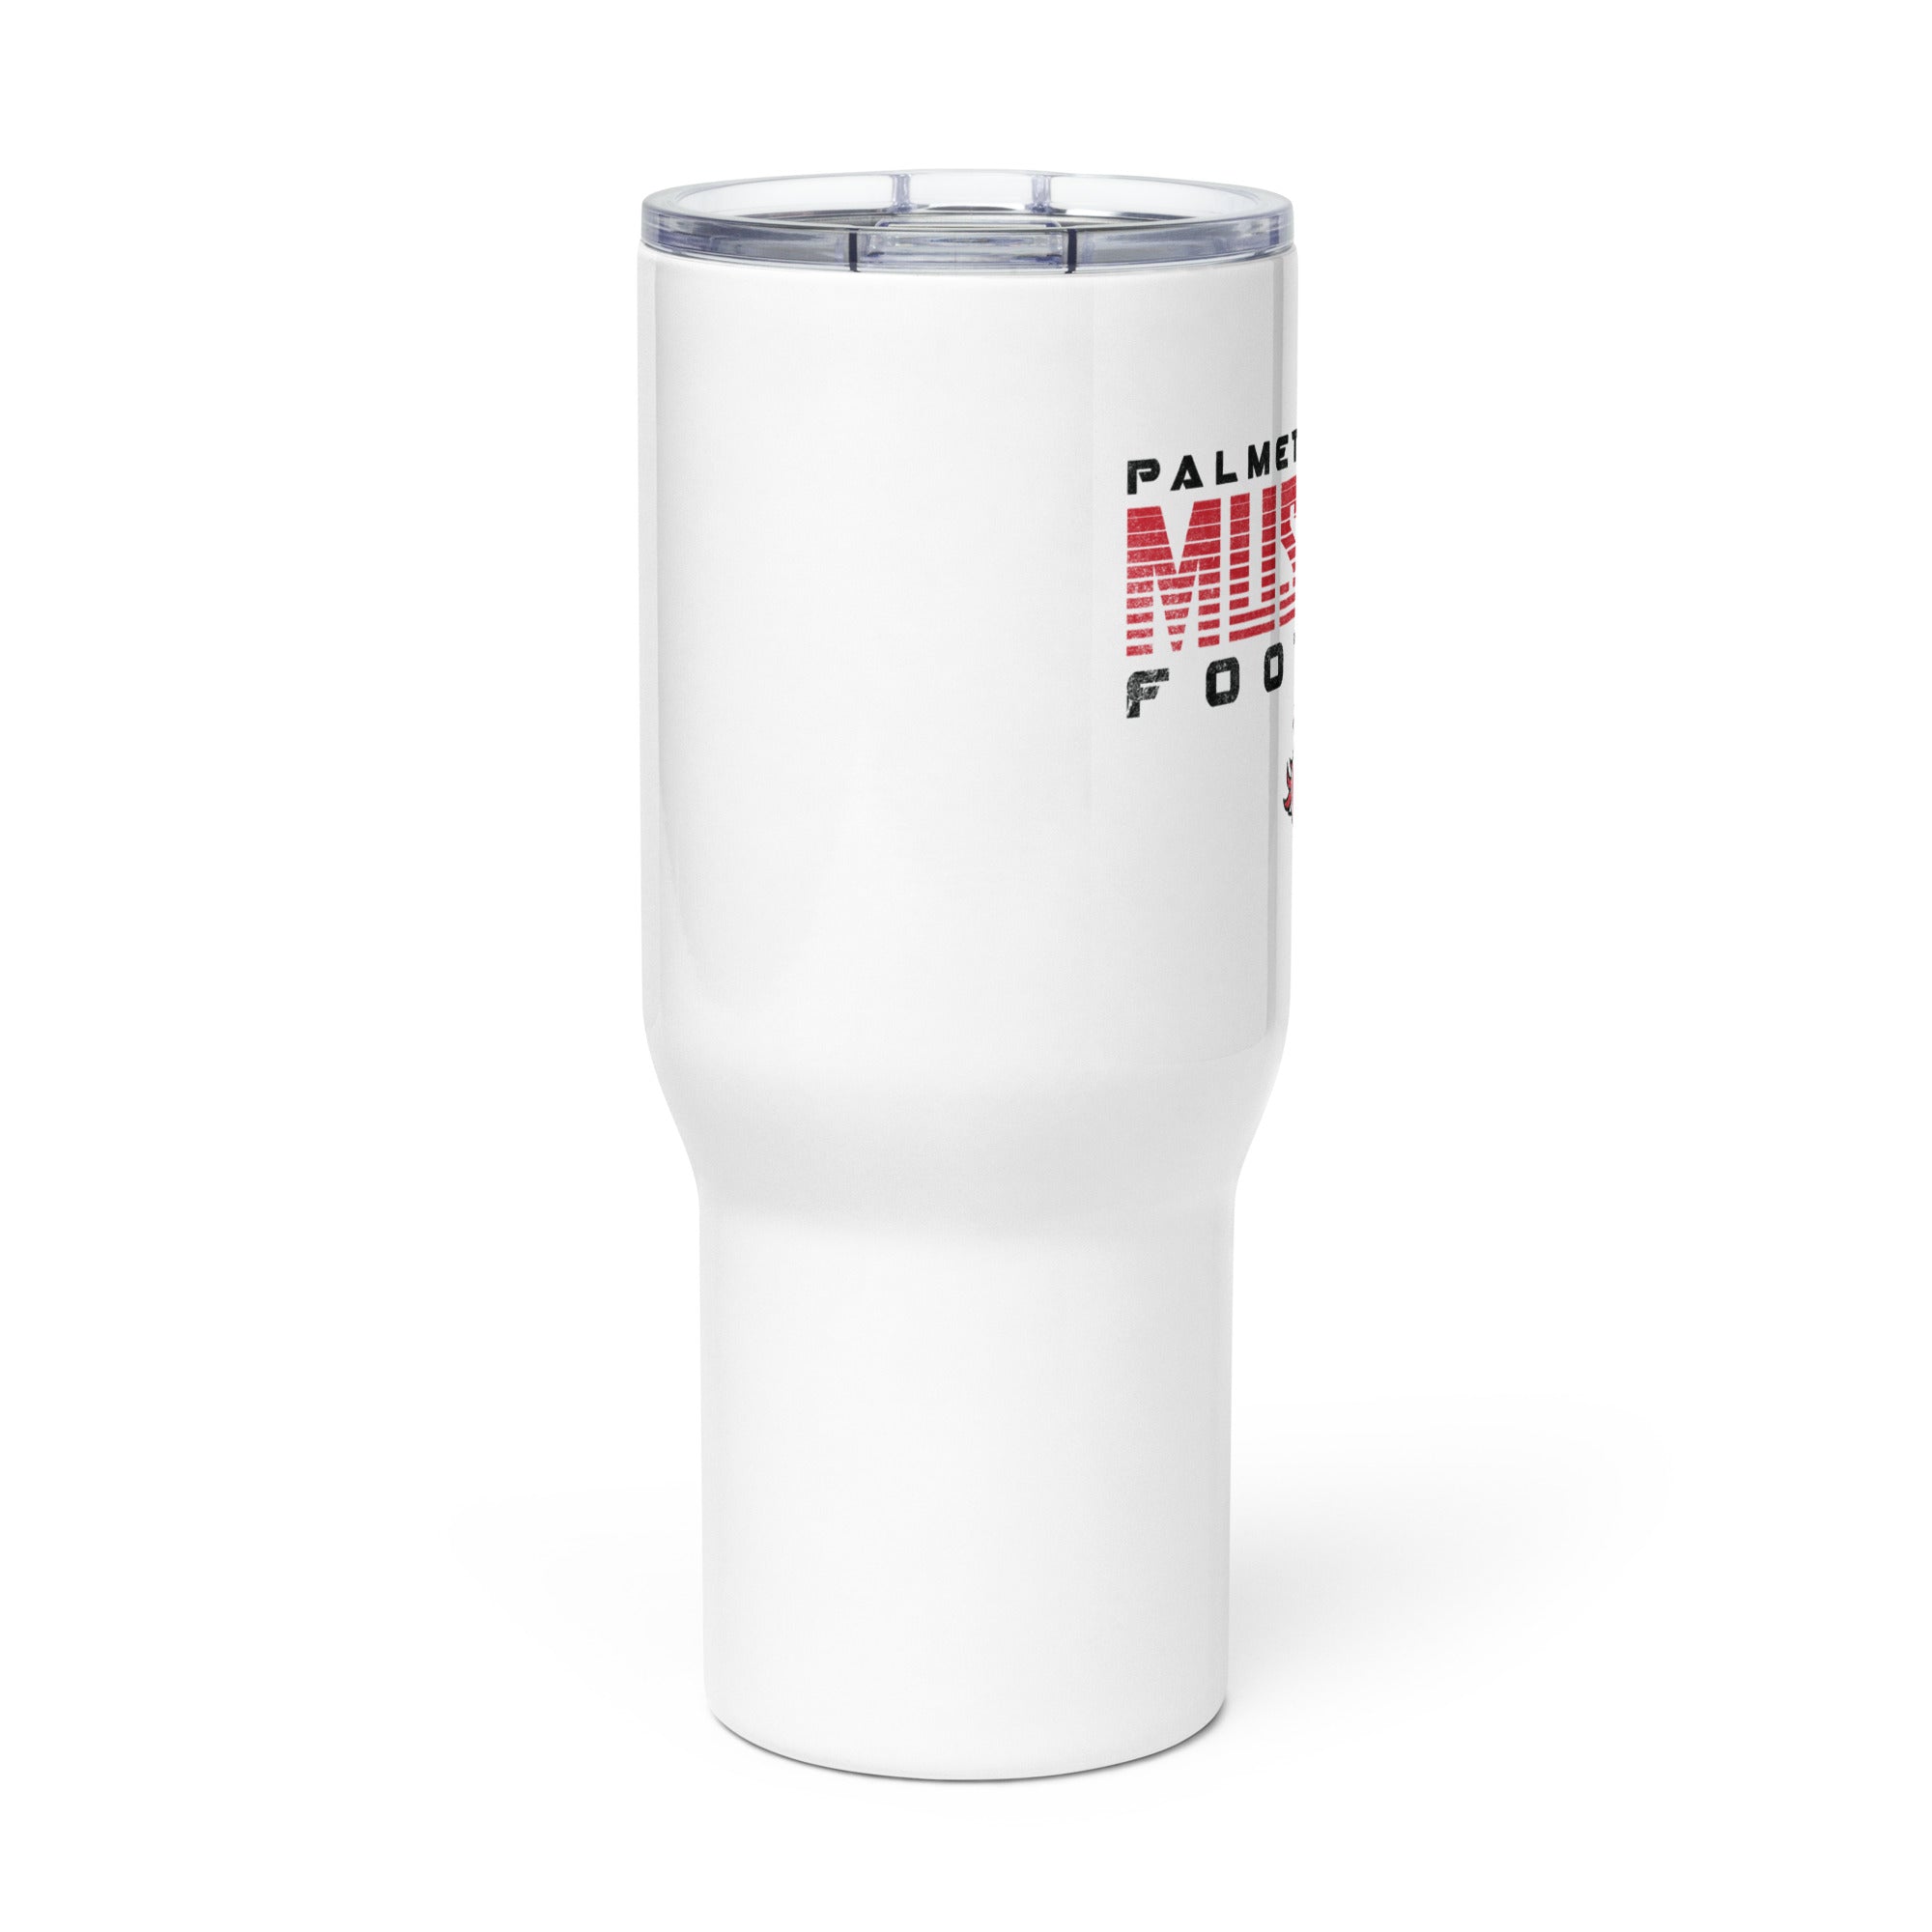 Palmetto Middle Football Travel mug with a handle